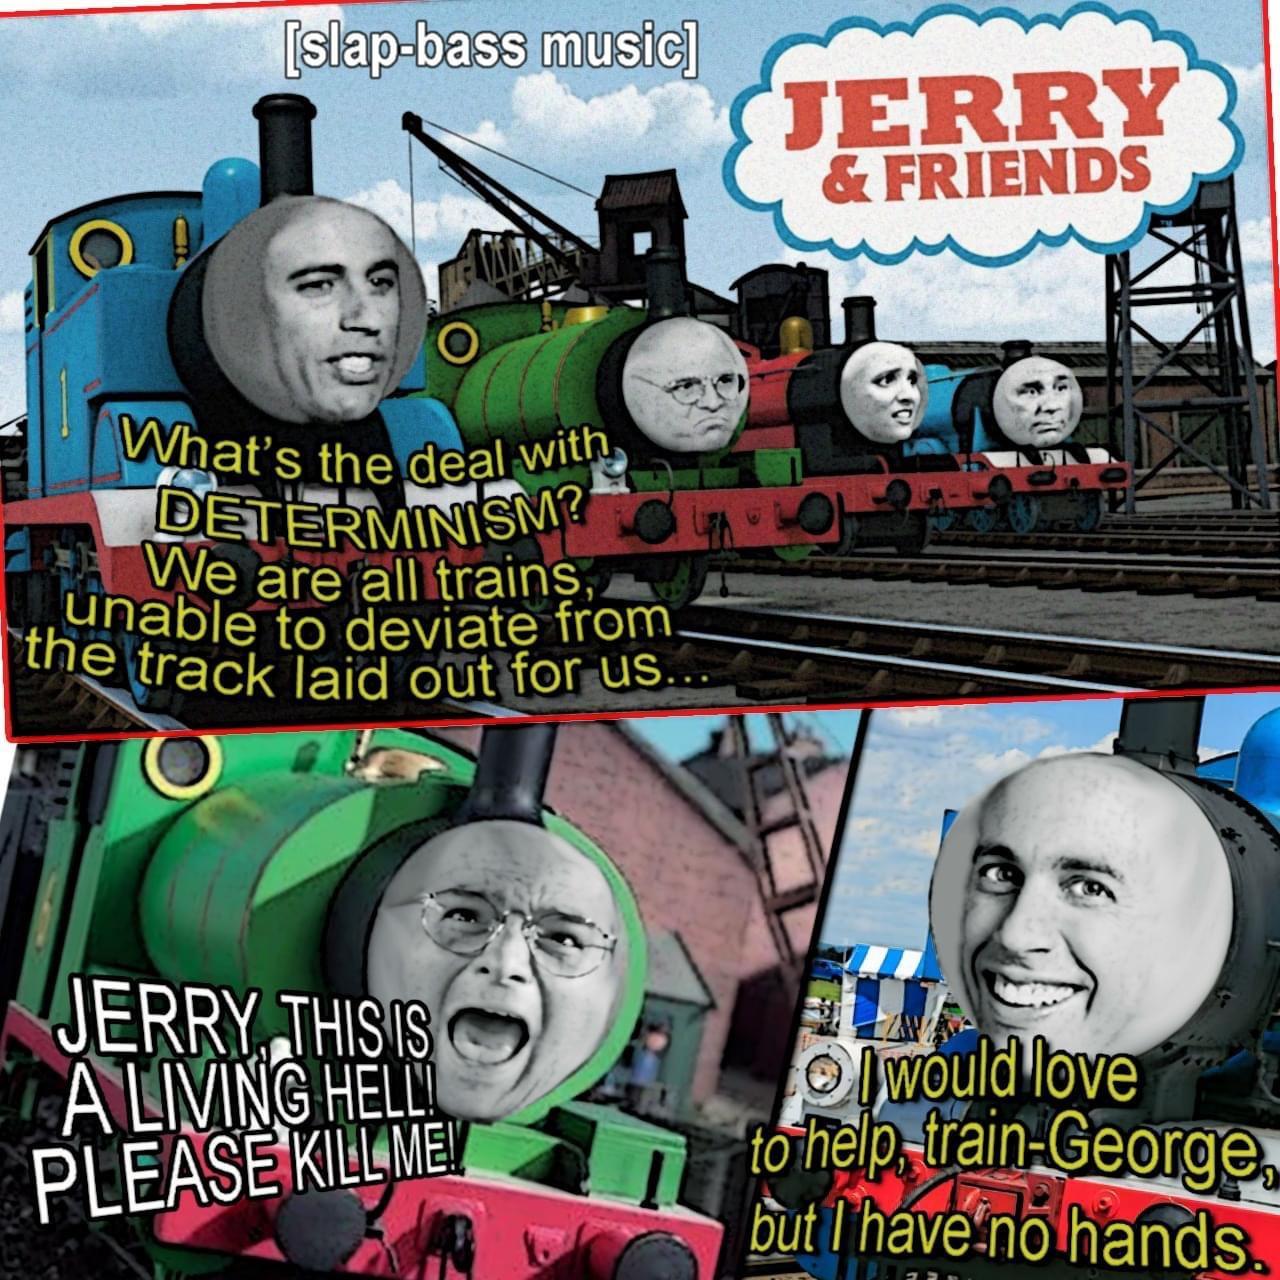 dank memes - poster - slapbass music What's the deal with Determinism? We are all trains, unable to deviate from_ the track laid out for us.. Jerry This Is A Living Helli Please Kill Me! Jerry & Friends But would love to help trainGeorge, but I have no ha